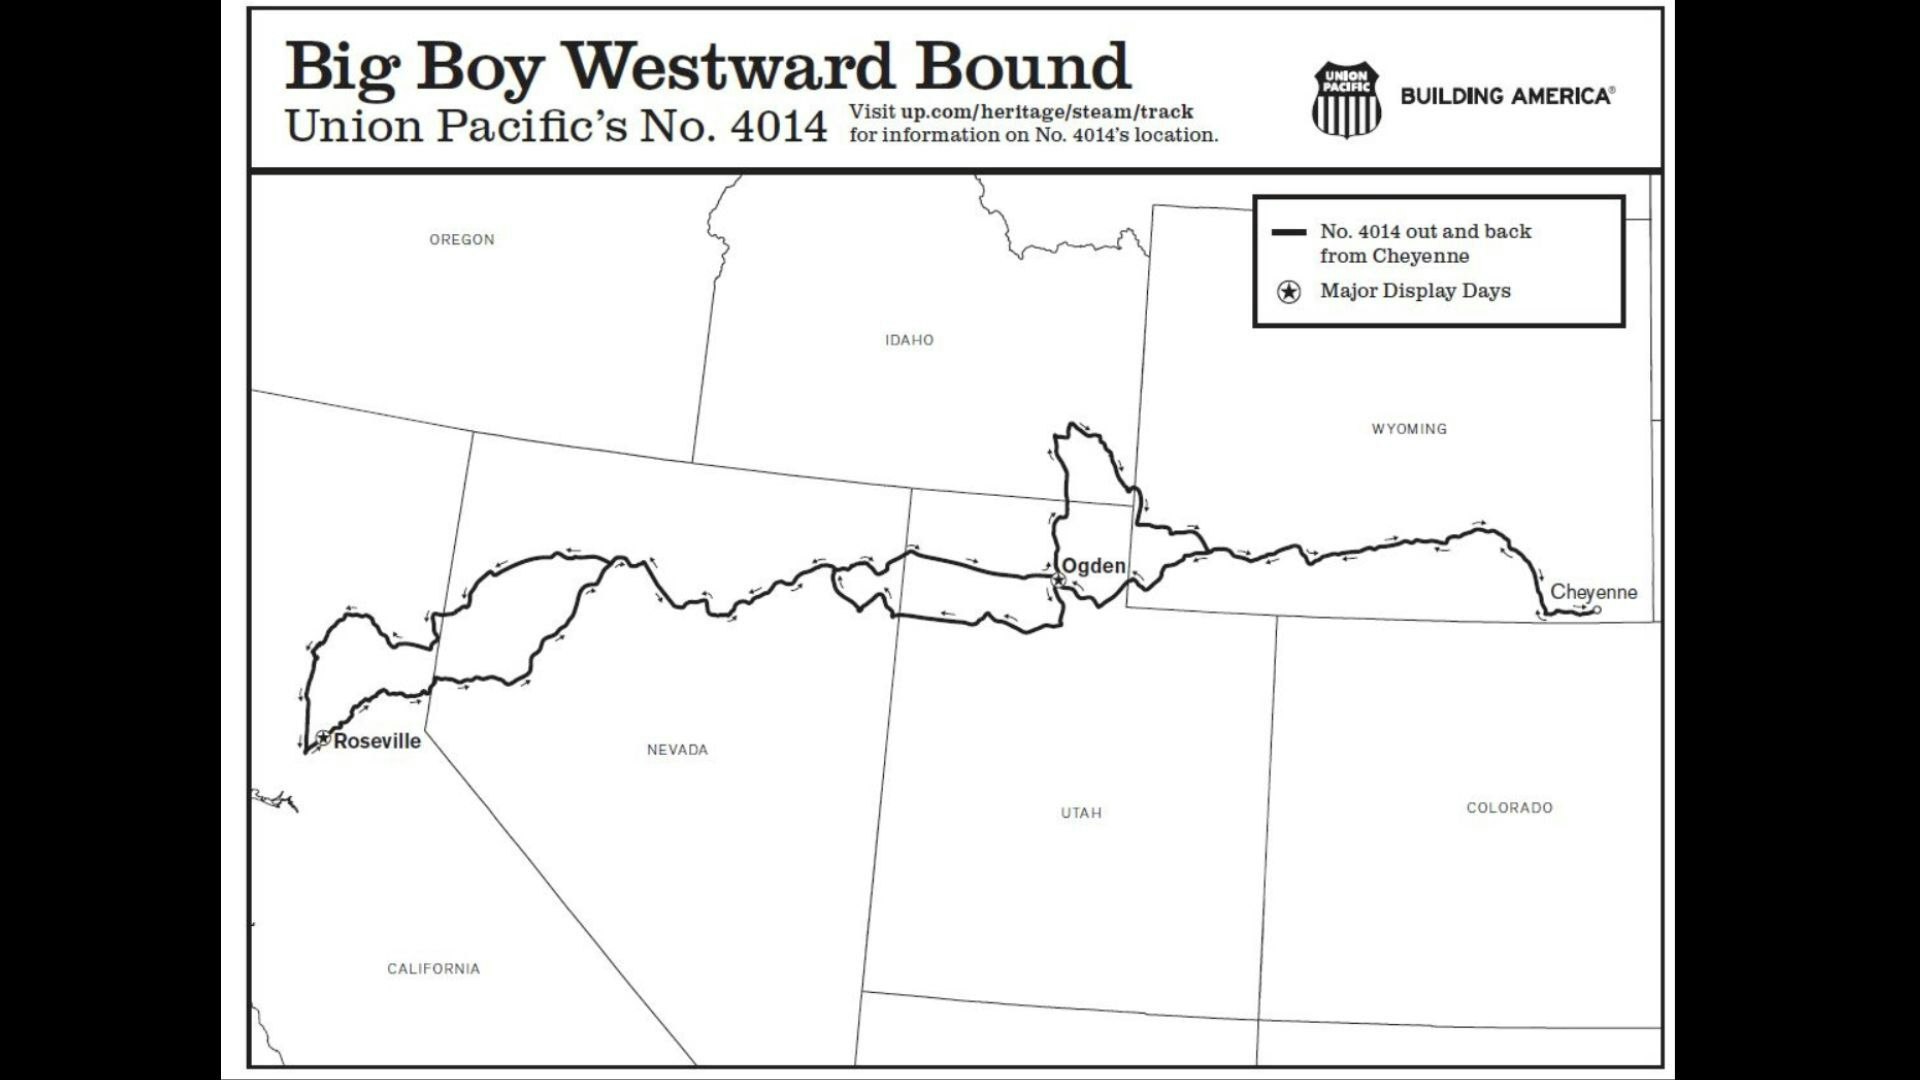 The Big Boy 4014 will head out on a tour of the western states this summer. This map provided Union Pacific shows its route.